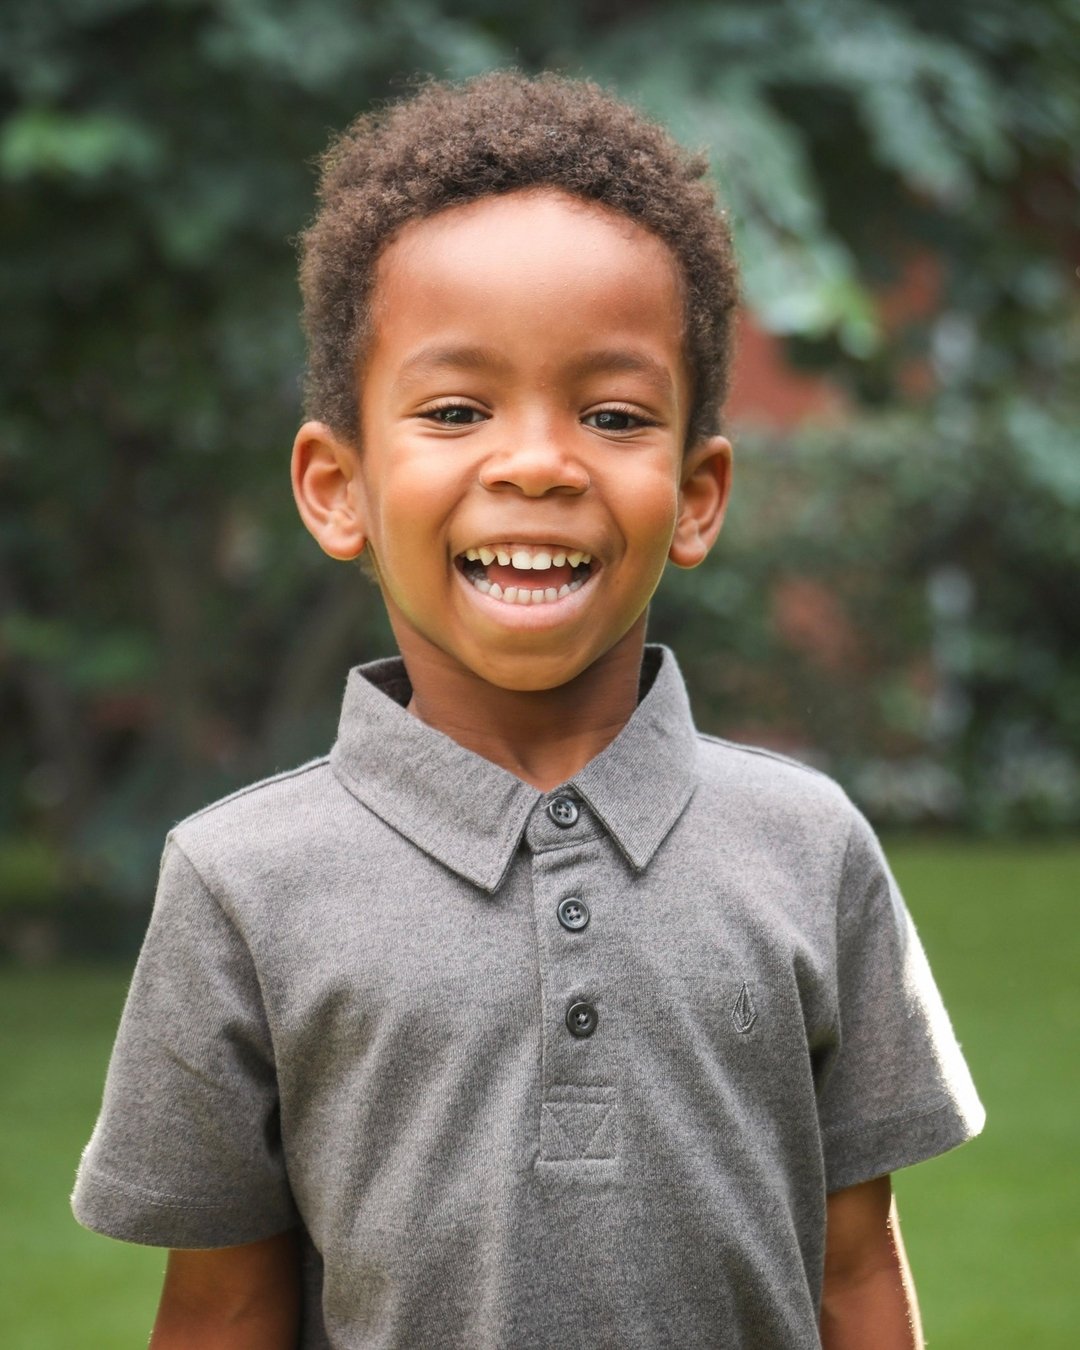 Good morning Tuesday! 🌞 Time to rise, shine, and dazzle the world with your incredible energy! 

Let's capture that magic on camera! 📷✨ 

#schoolpictures2024 #schoolpics #schoolpictures #earlybird #nycschools #nycpublicschools #nyccharterschools #T